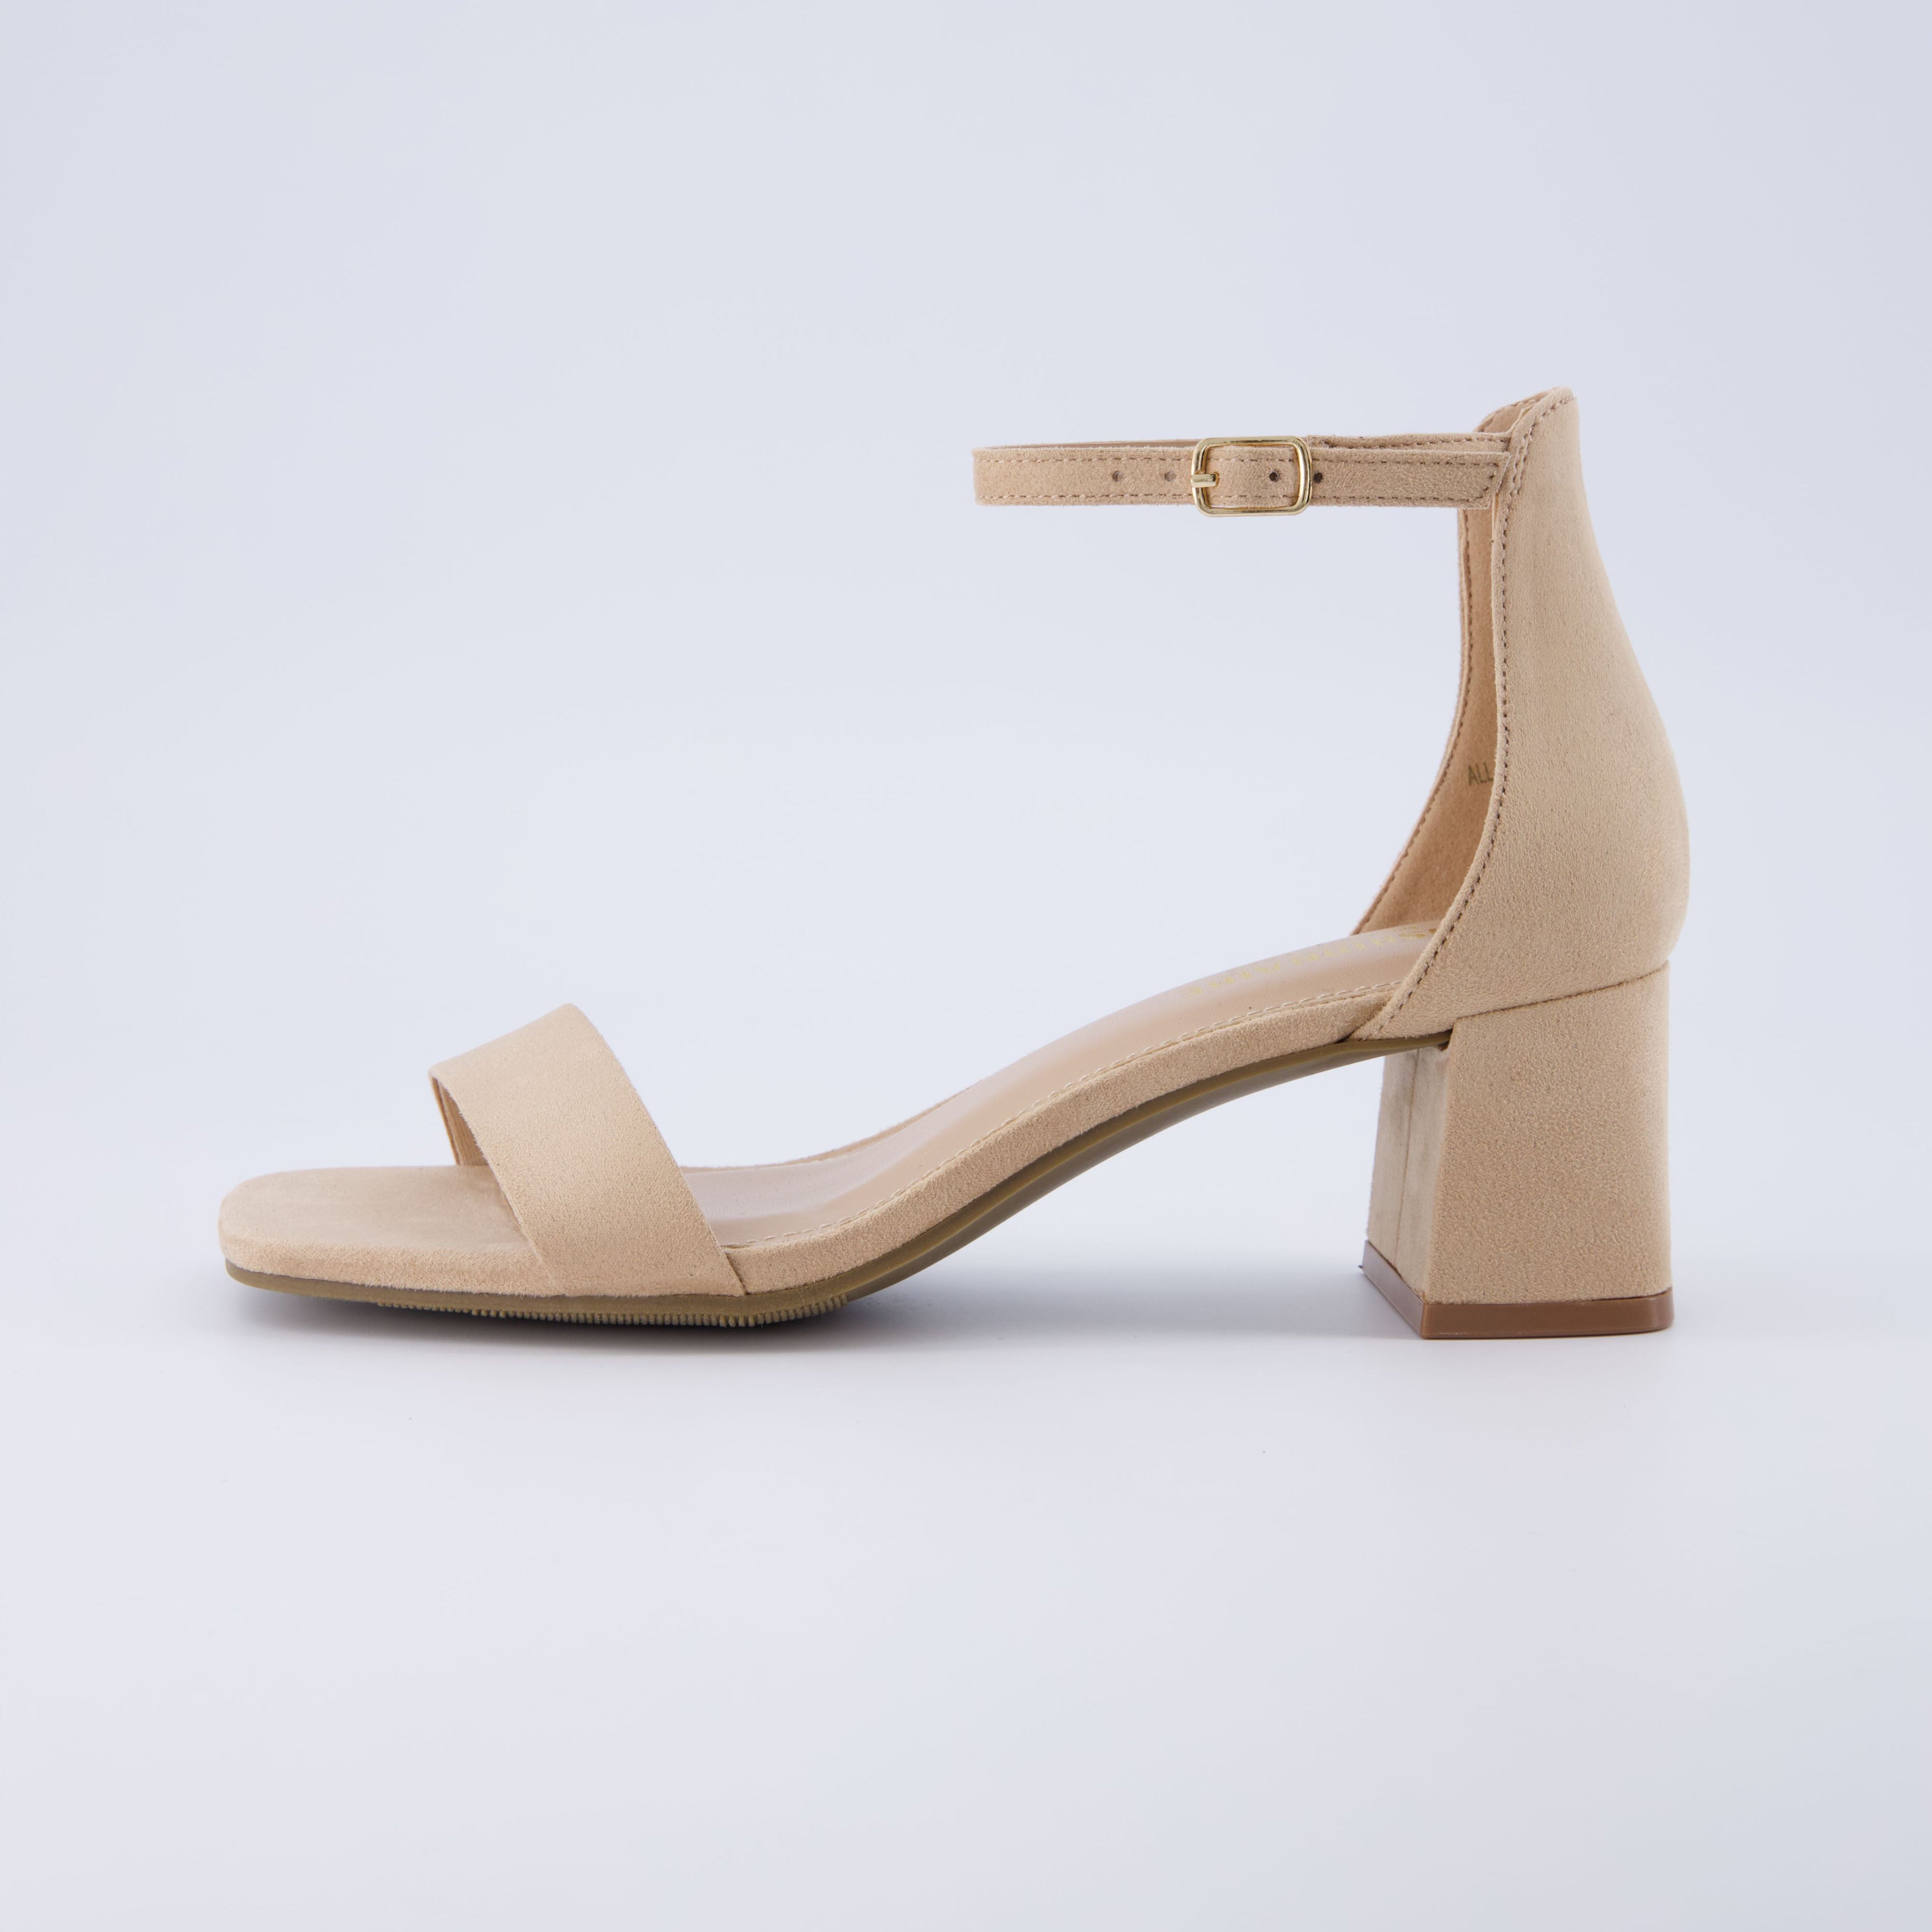 Wide-heeled sandals IGNIS PYRA Silver